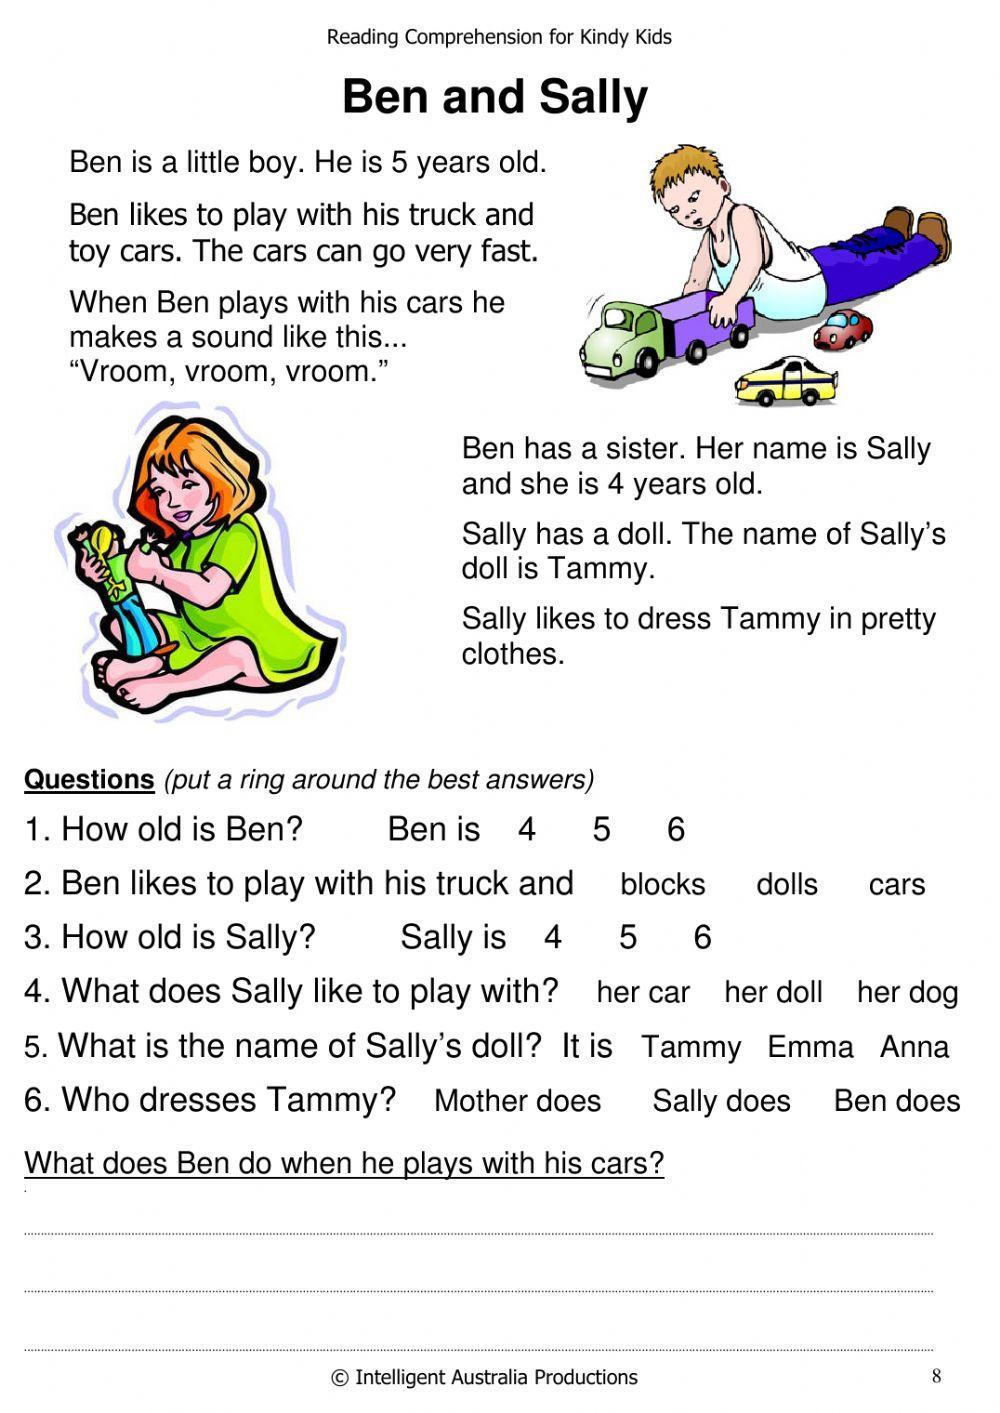 Reading - Ben and Sally